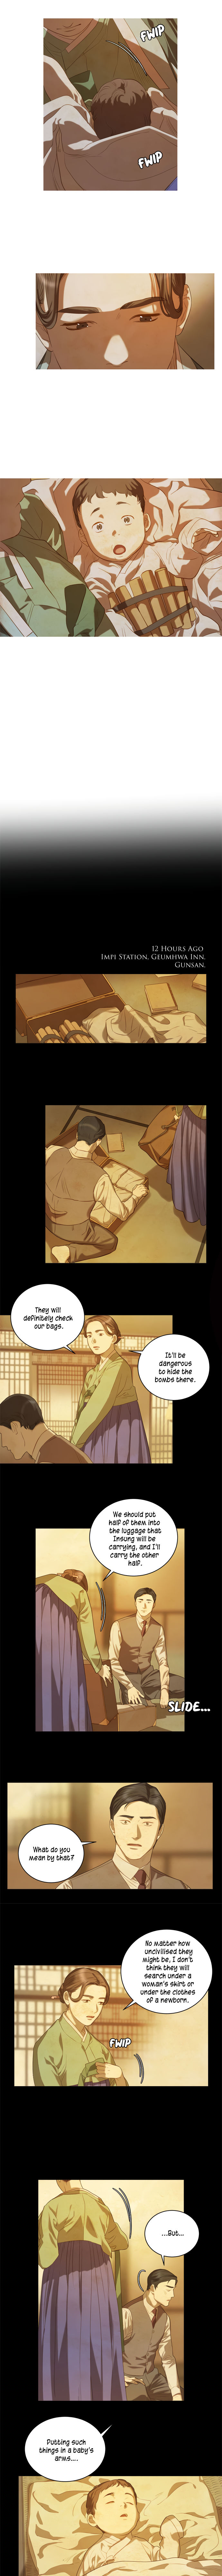 Gorae Byul - The Gyeongseong Mermaid - Chapter 9 Page 6